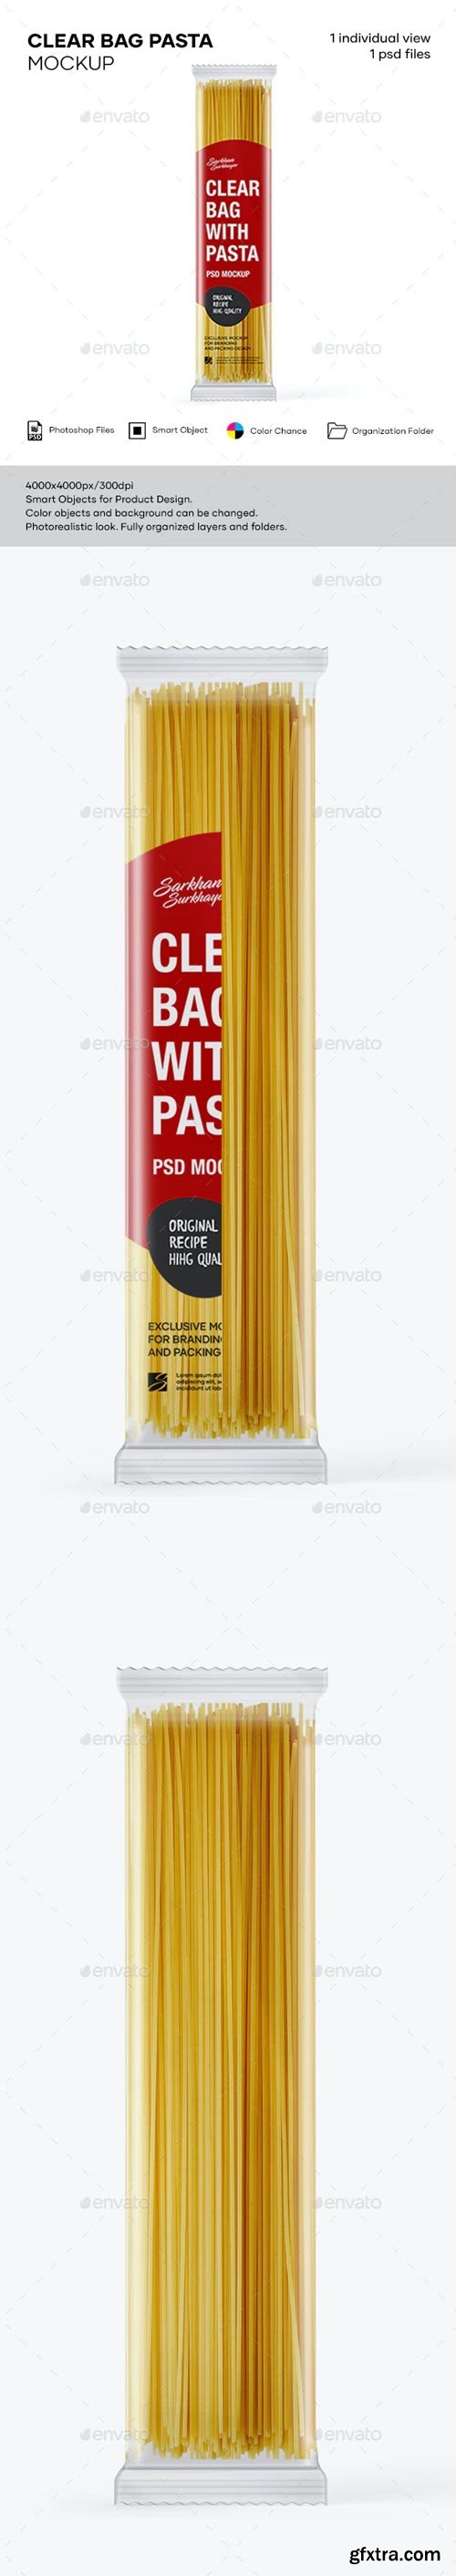 GraphicRiver - Clear Bag With Pasta Mockup - 29509333